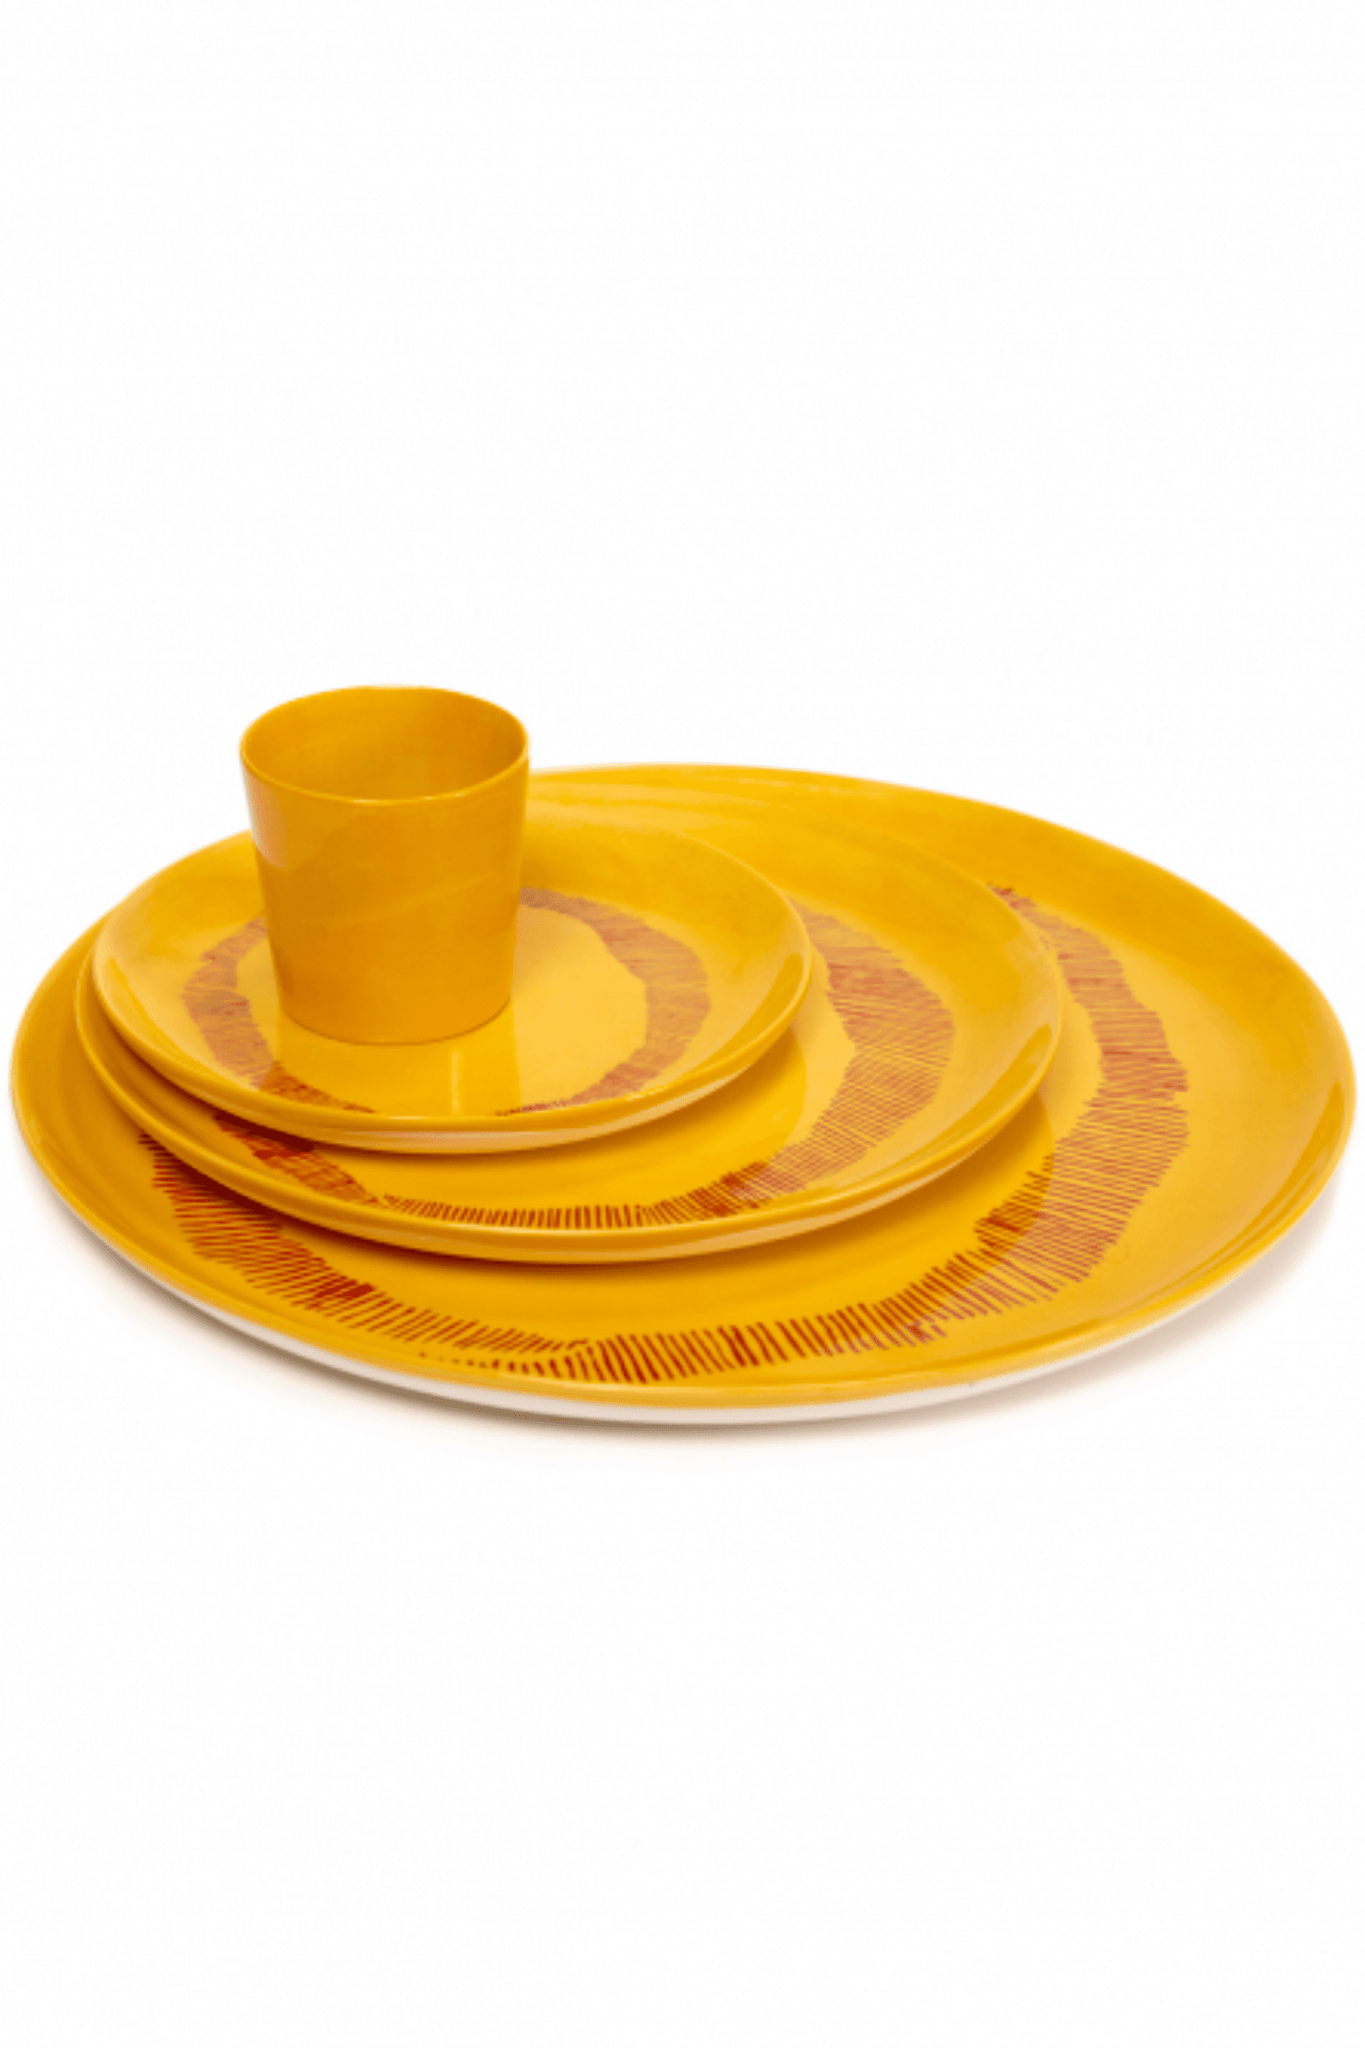 Set of 2 Small Plates, Sunny Yellow Swirl with Red Stripes Ottolenghi Serax, shown stacked